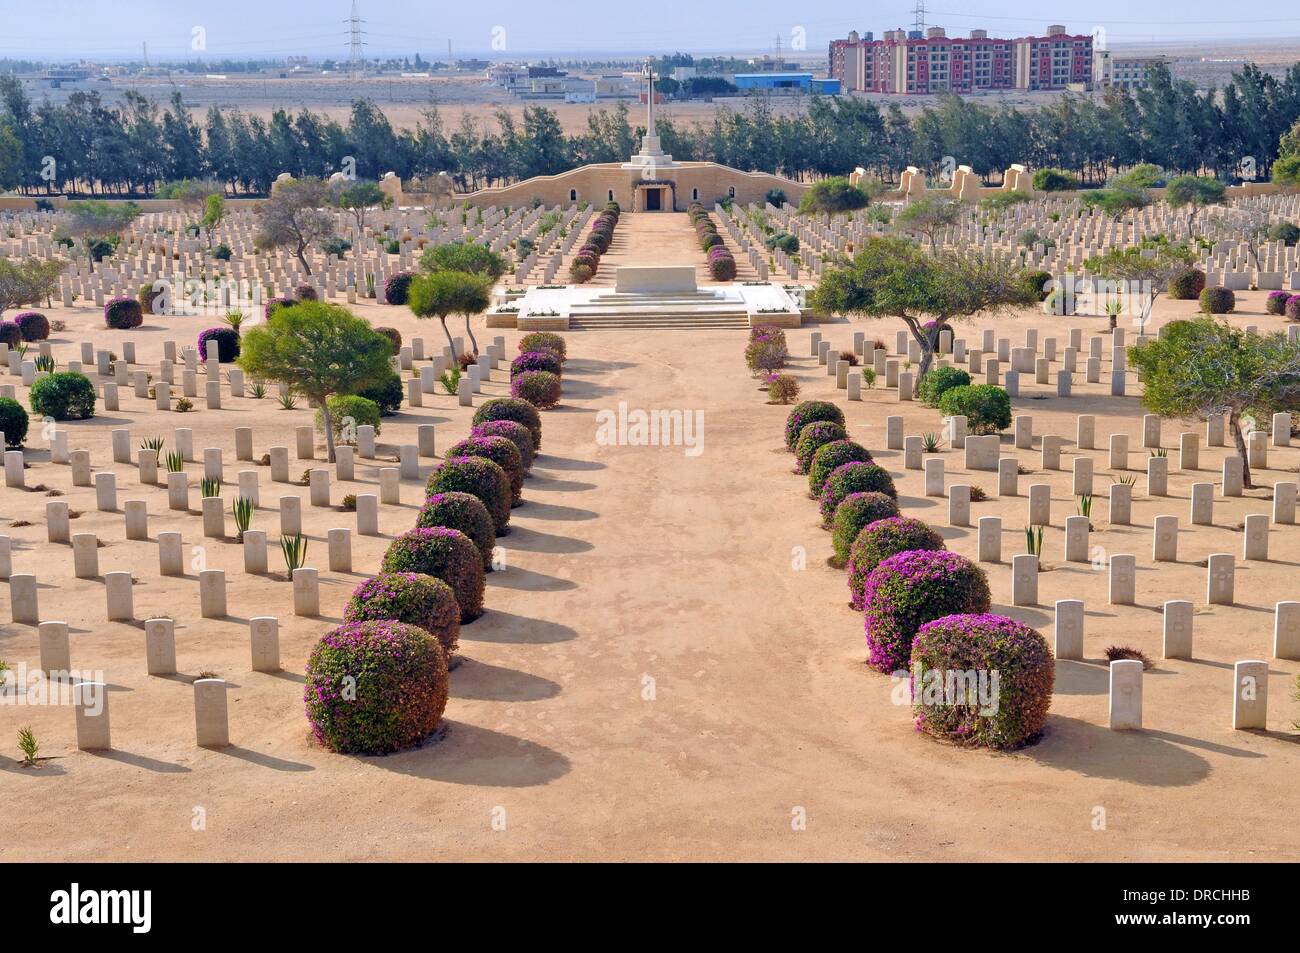 El Alamein, Egypt. 10th Jan, 2014. View of the Commonwealth war cemetery in El Alamein, Egypt, 10 January 2014. The Commonwealth war cemetery in El Alamein is the greatest of all war cemeteries on the Egyptian North Coast with graves of soldiers from various countries who fought on the Allied side. The cemetry commemorates Greek, New Zealand, Australian, South African, Indian and Canadian forces. Photo: Matthias Toedt - NO WIRE SERVICE/dpa/Alamy Live News Stock Photo